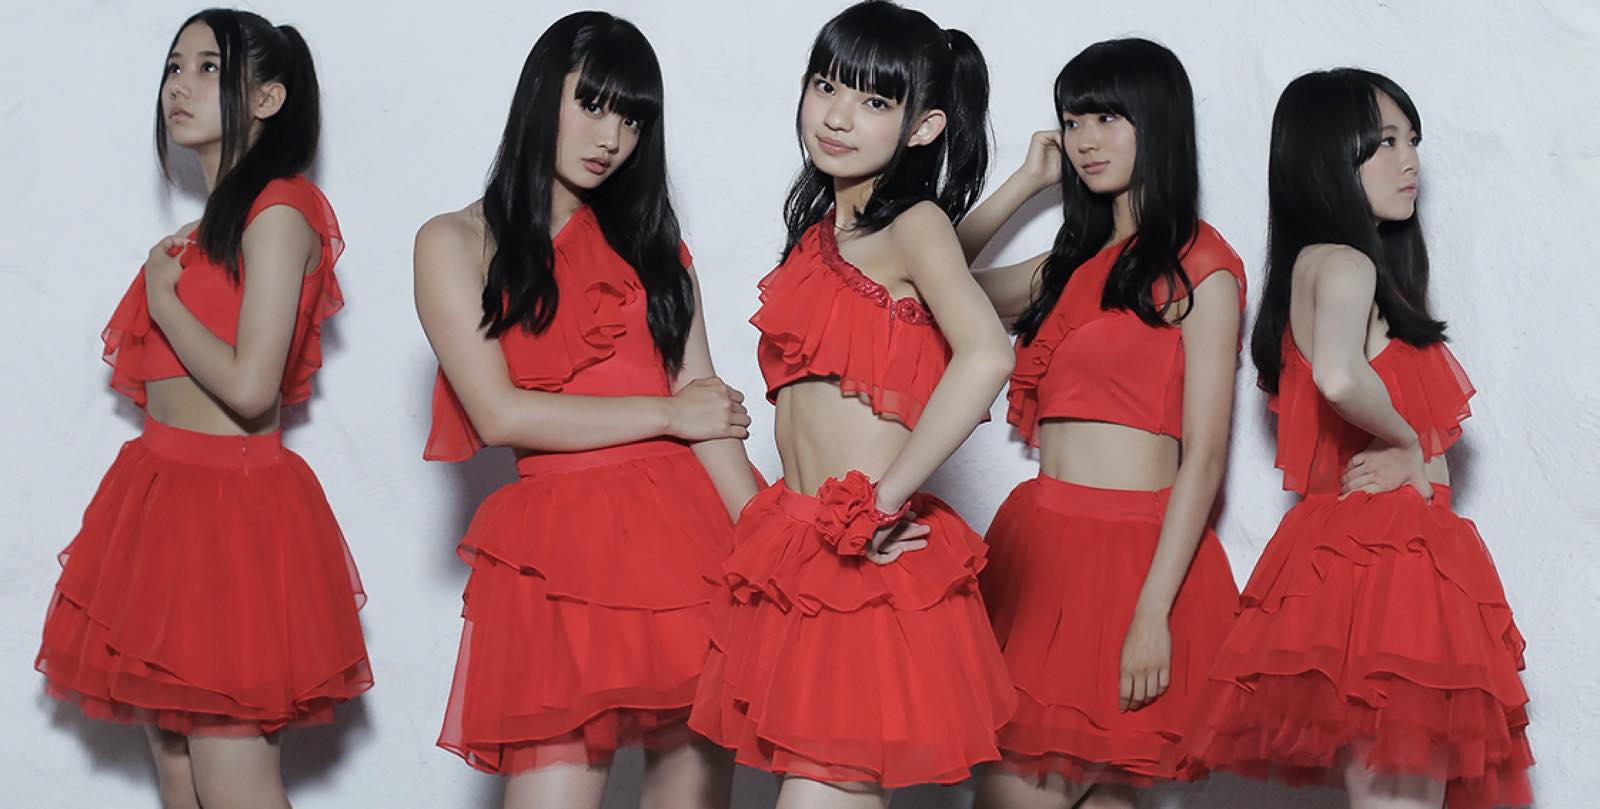 DIANNA☆SWEET is en Fuego! Full-Length MV for “FIRE GIRL” Bursts into Flames!